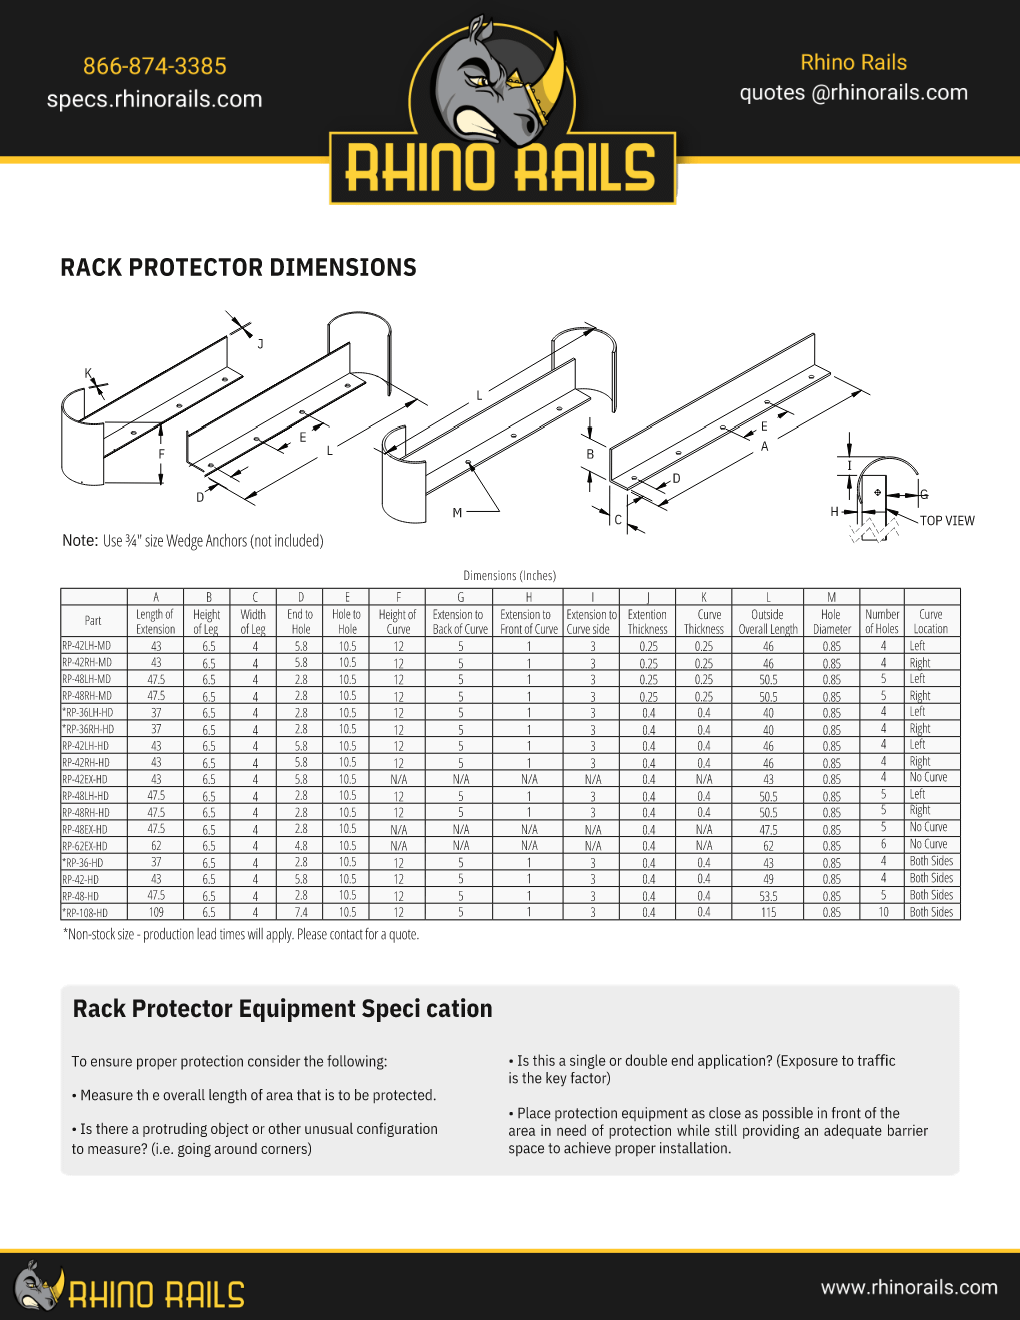 Universal Rack Protector - Product Information Sheet - Photo